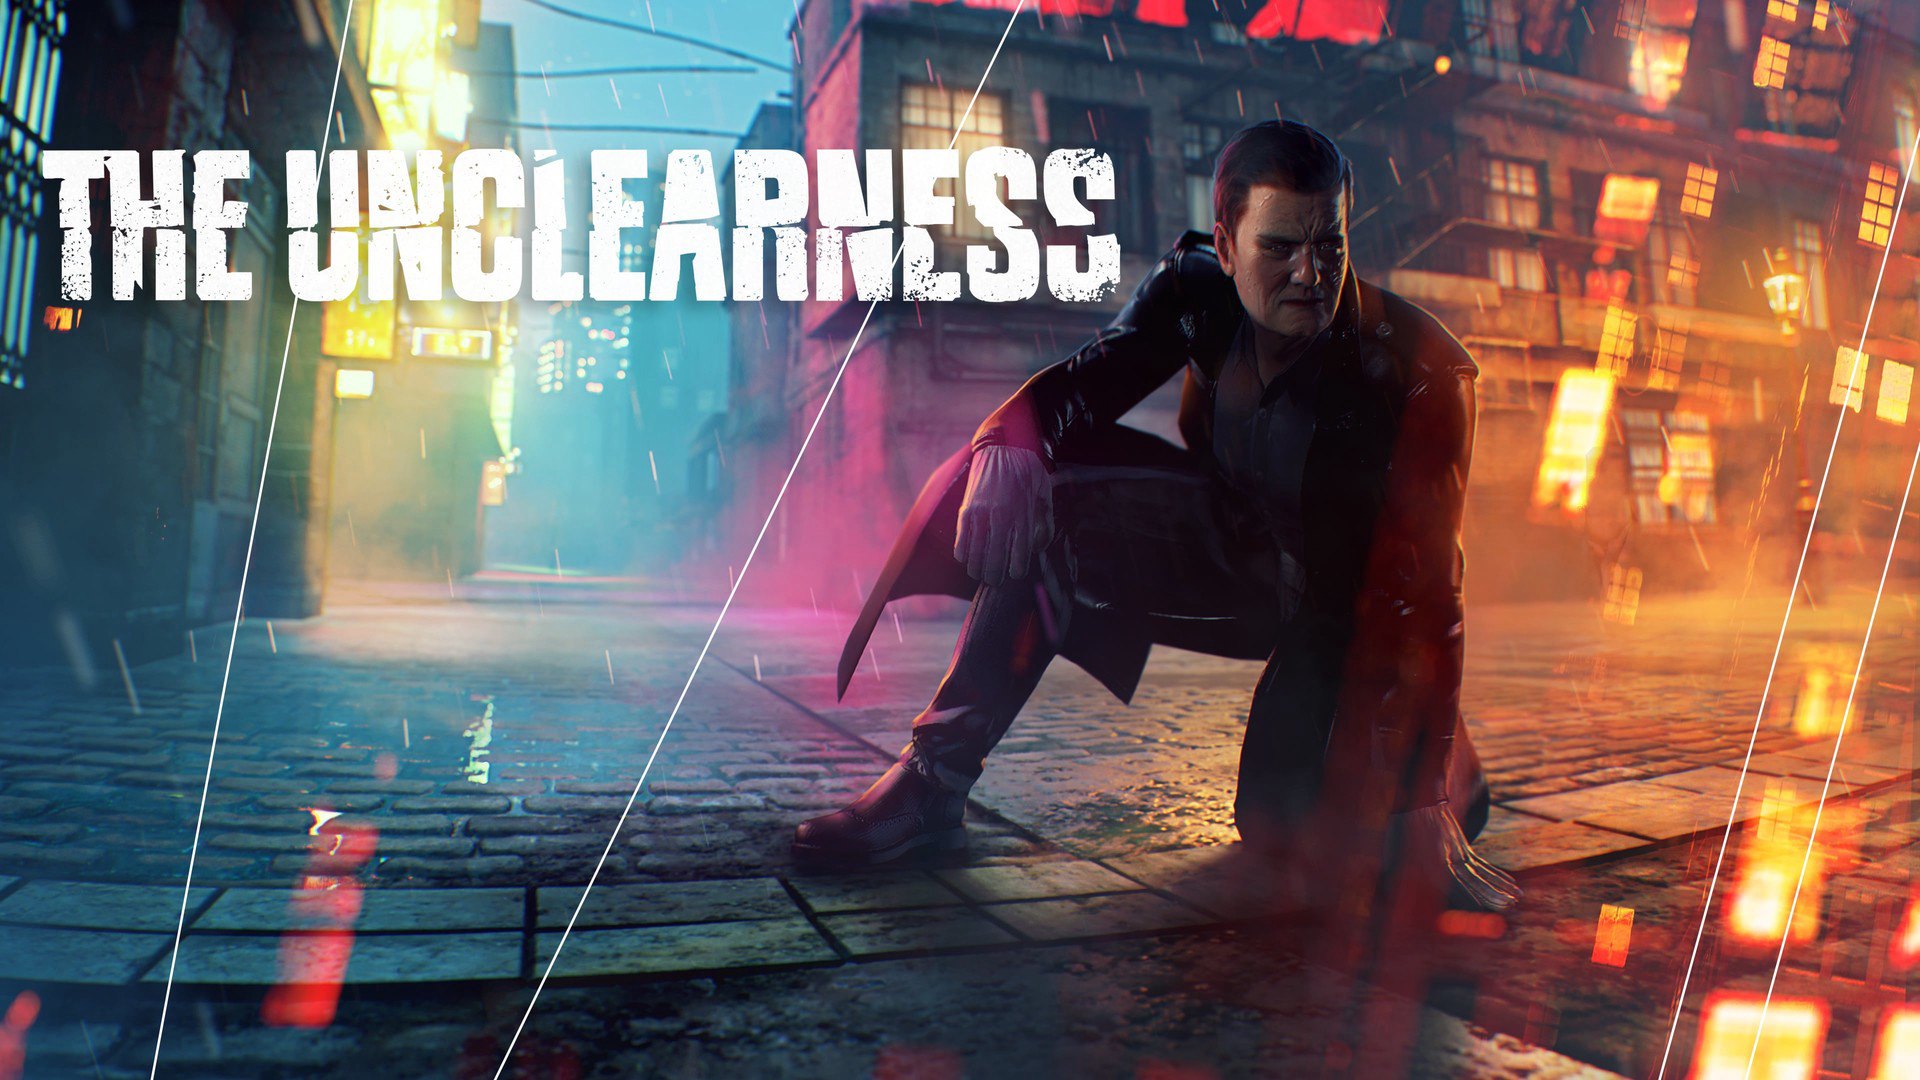 THE UNCLEARNESS Steam CD Key (6.77$)